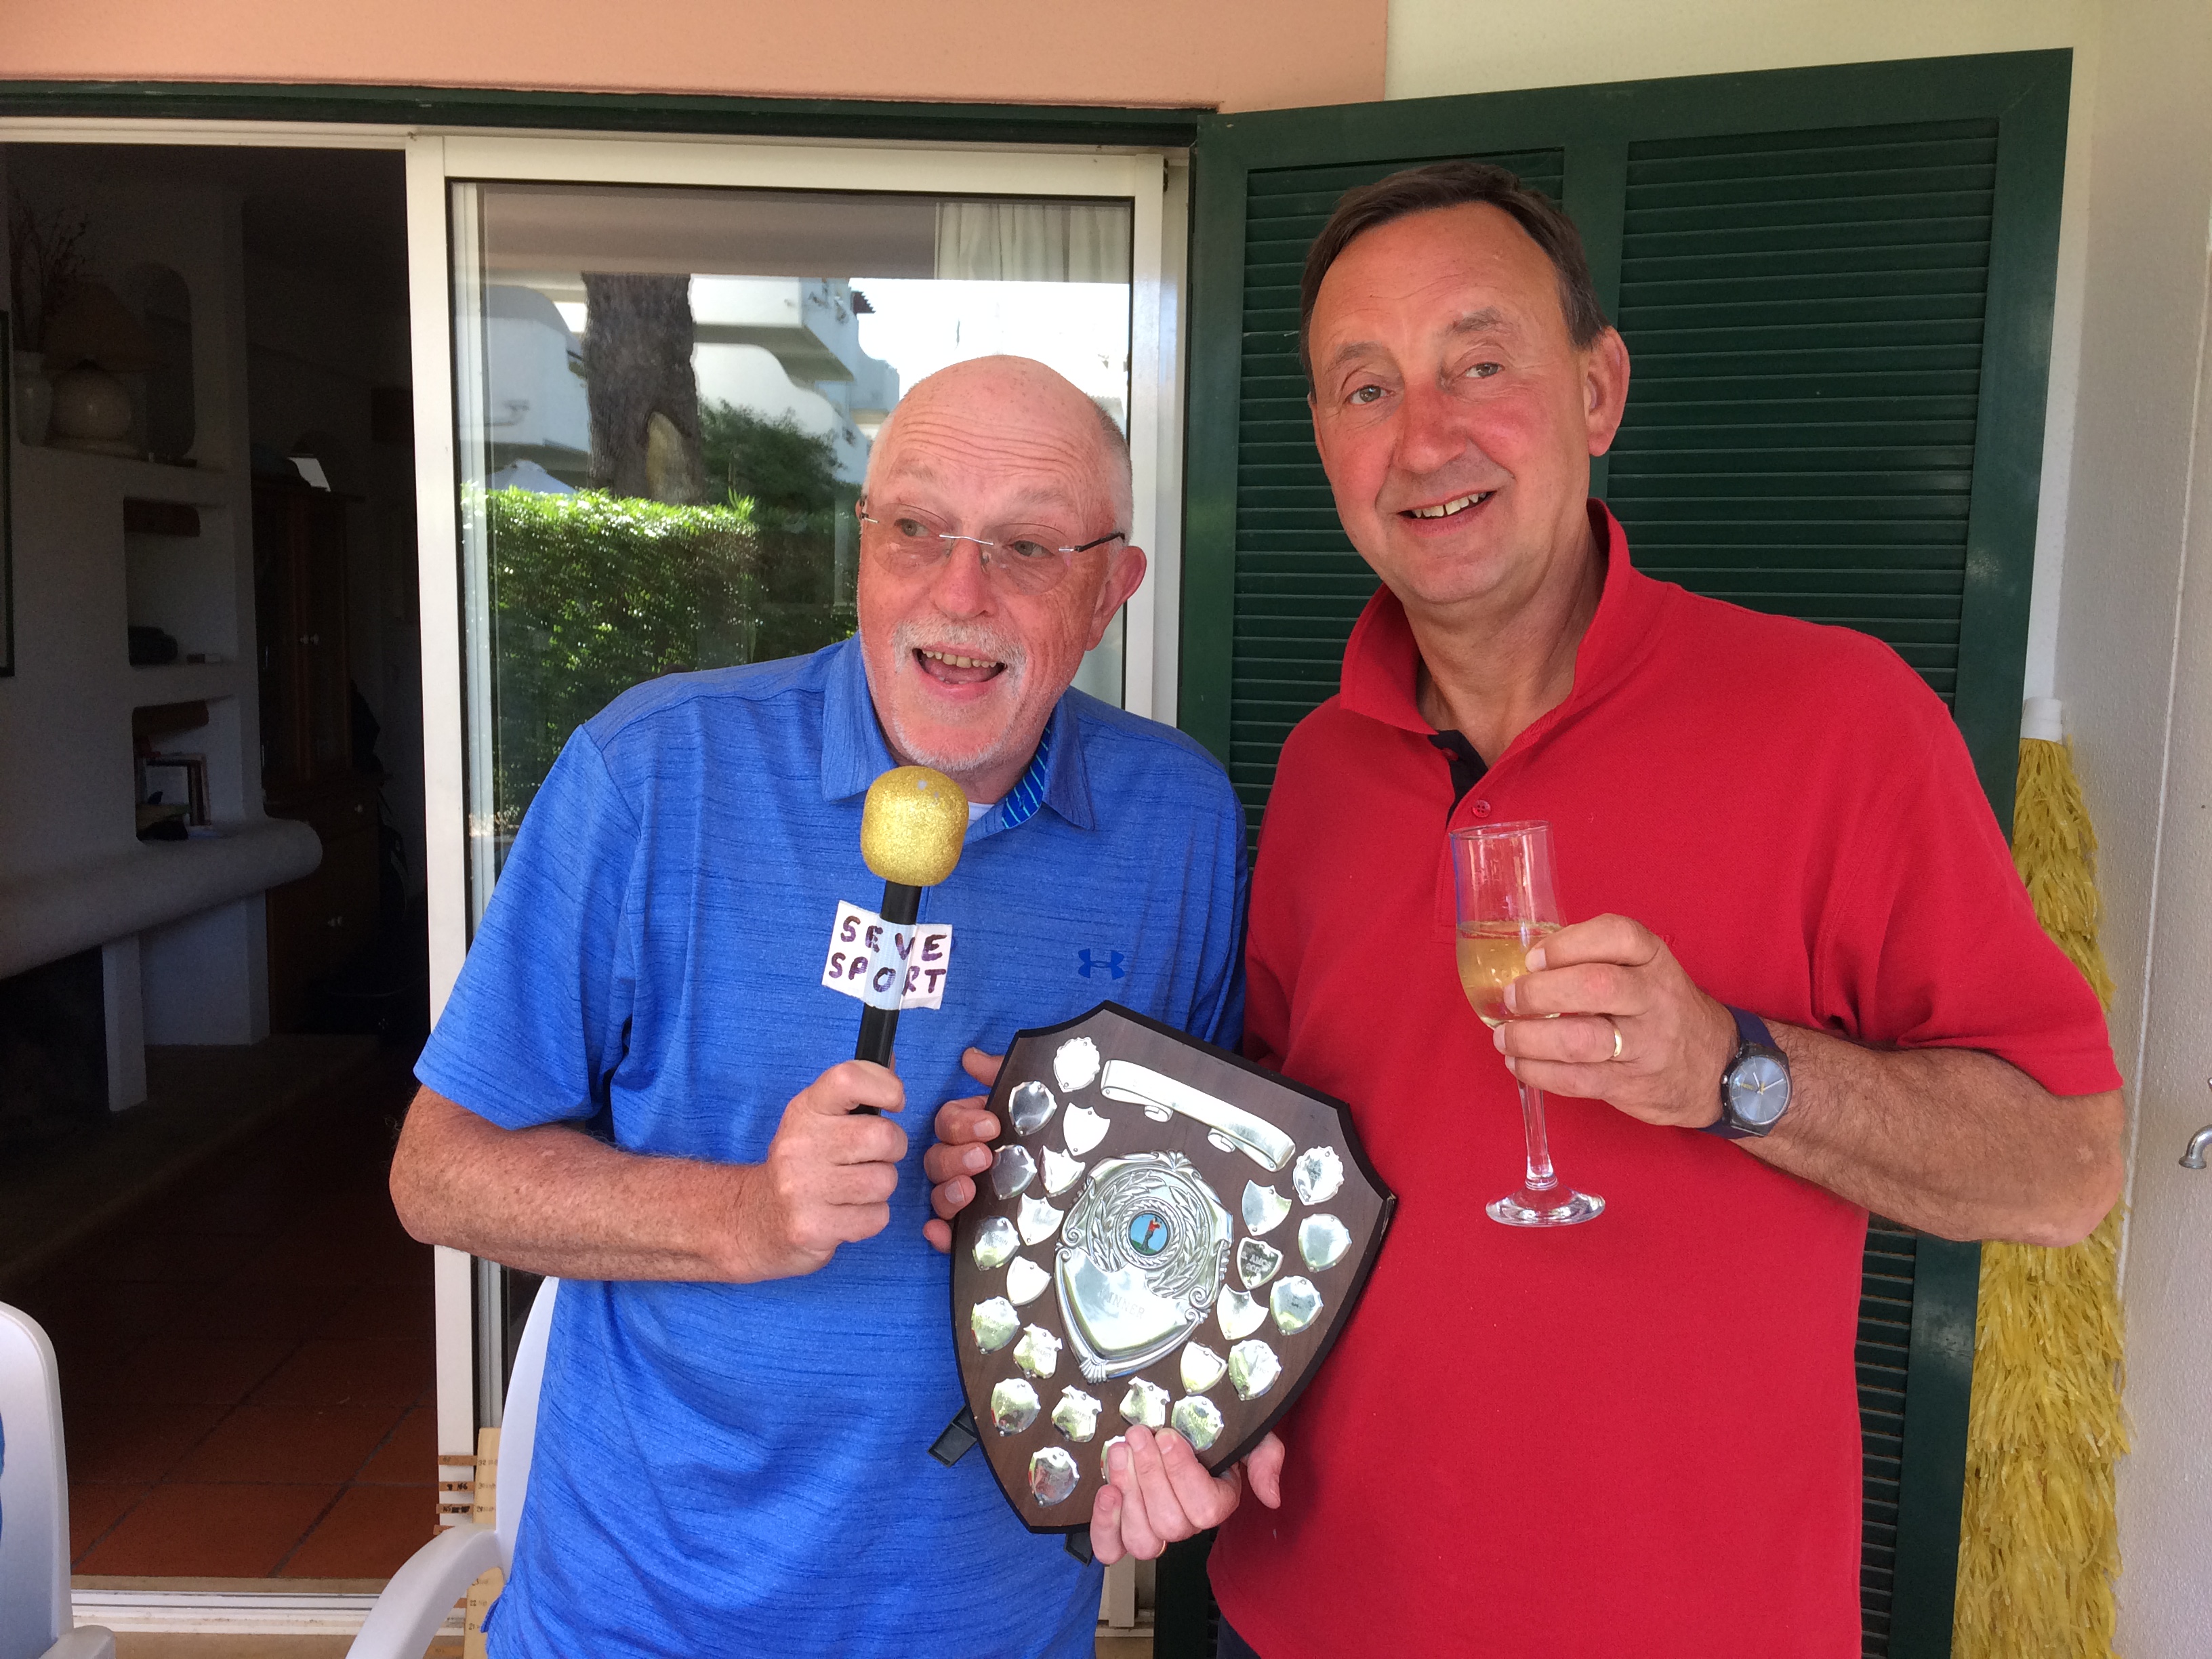 MK Seve Makes Counter Claim For Portugal Tour Trophies !